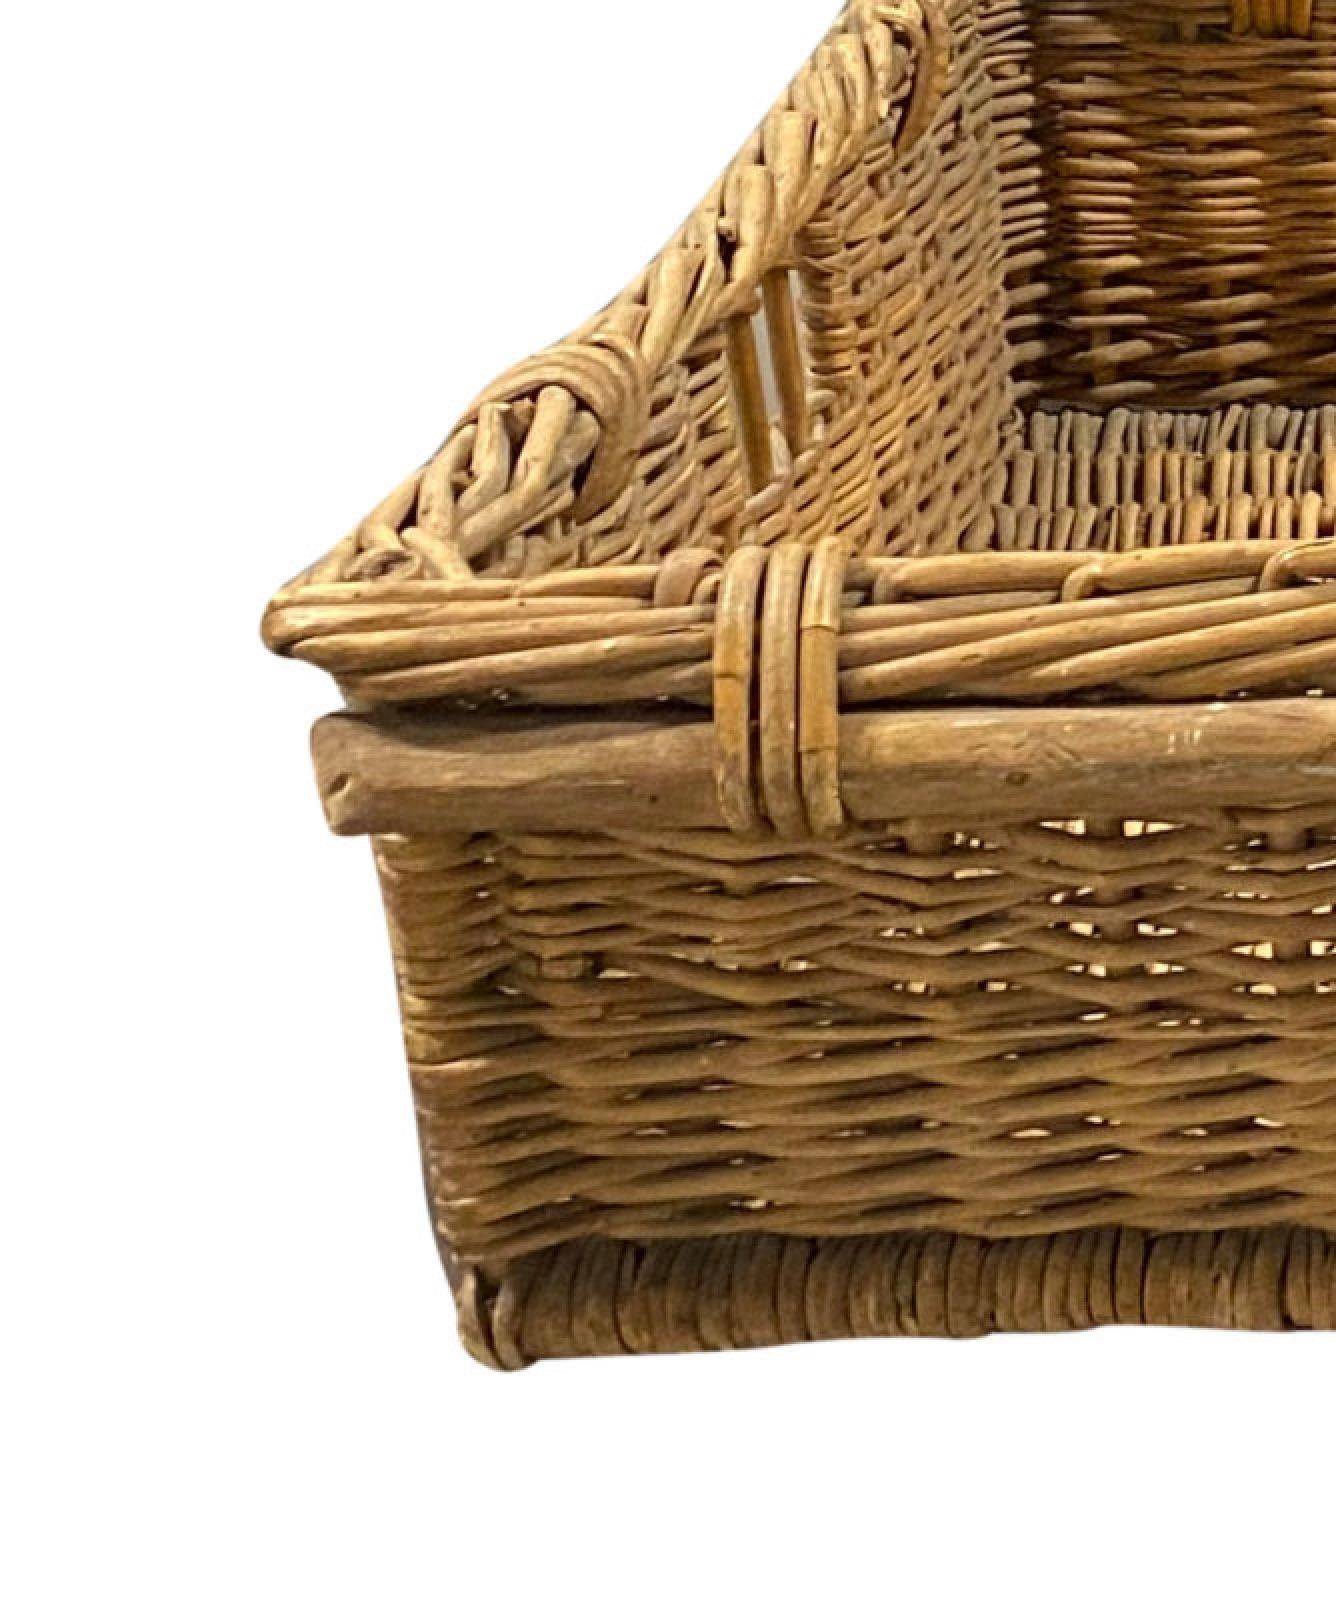 Wide shallow vintage wicker wash basket

Great for use in a laundry room or mudroom as a rustic dog bed

Damage to right handle

41″L x 20″W x 9″H